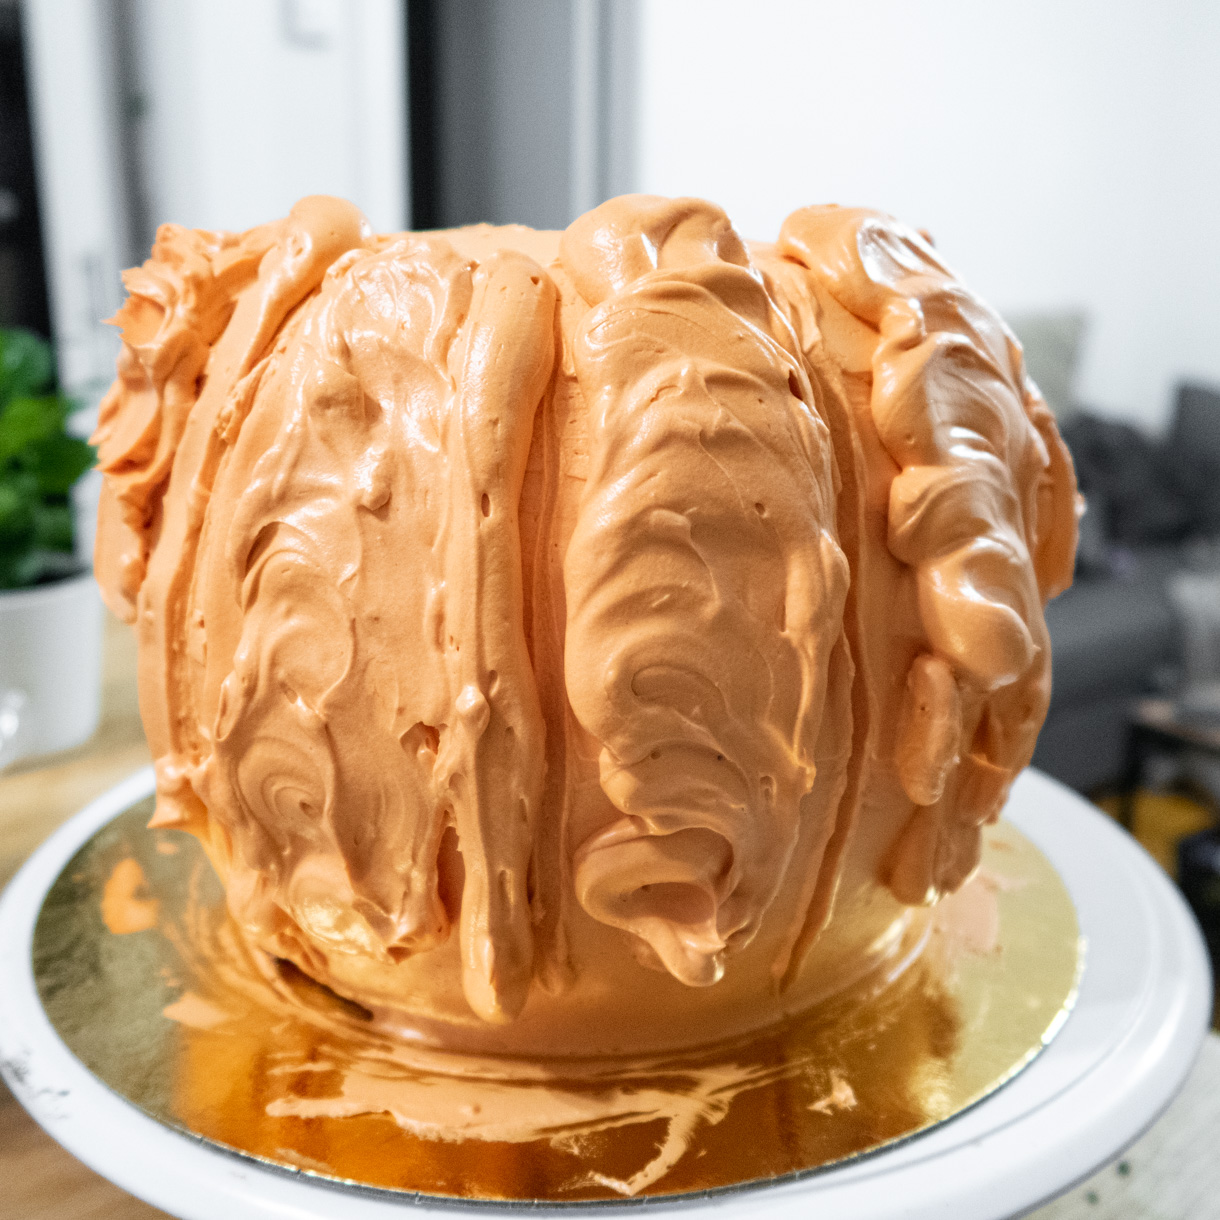 Using piped buttercream to build segments to make the cake look like a pumpkin.